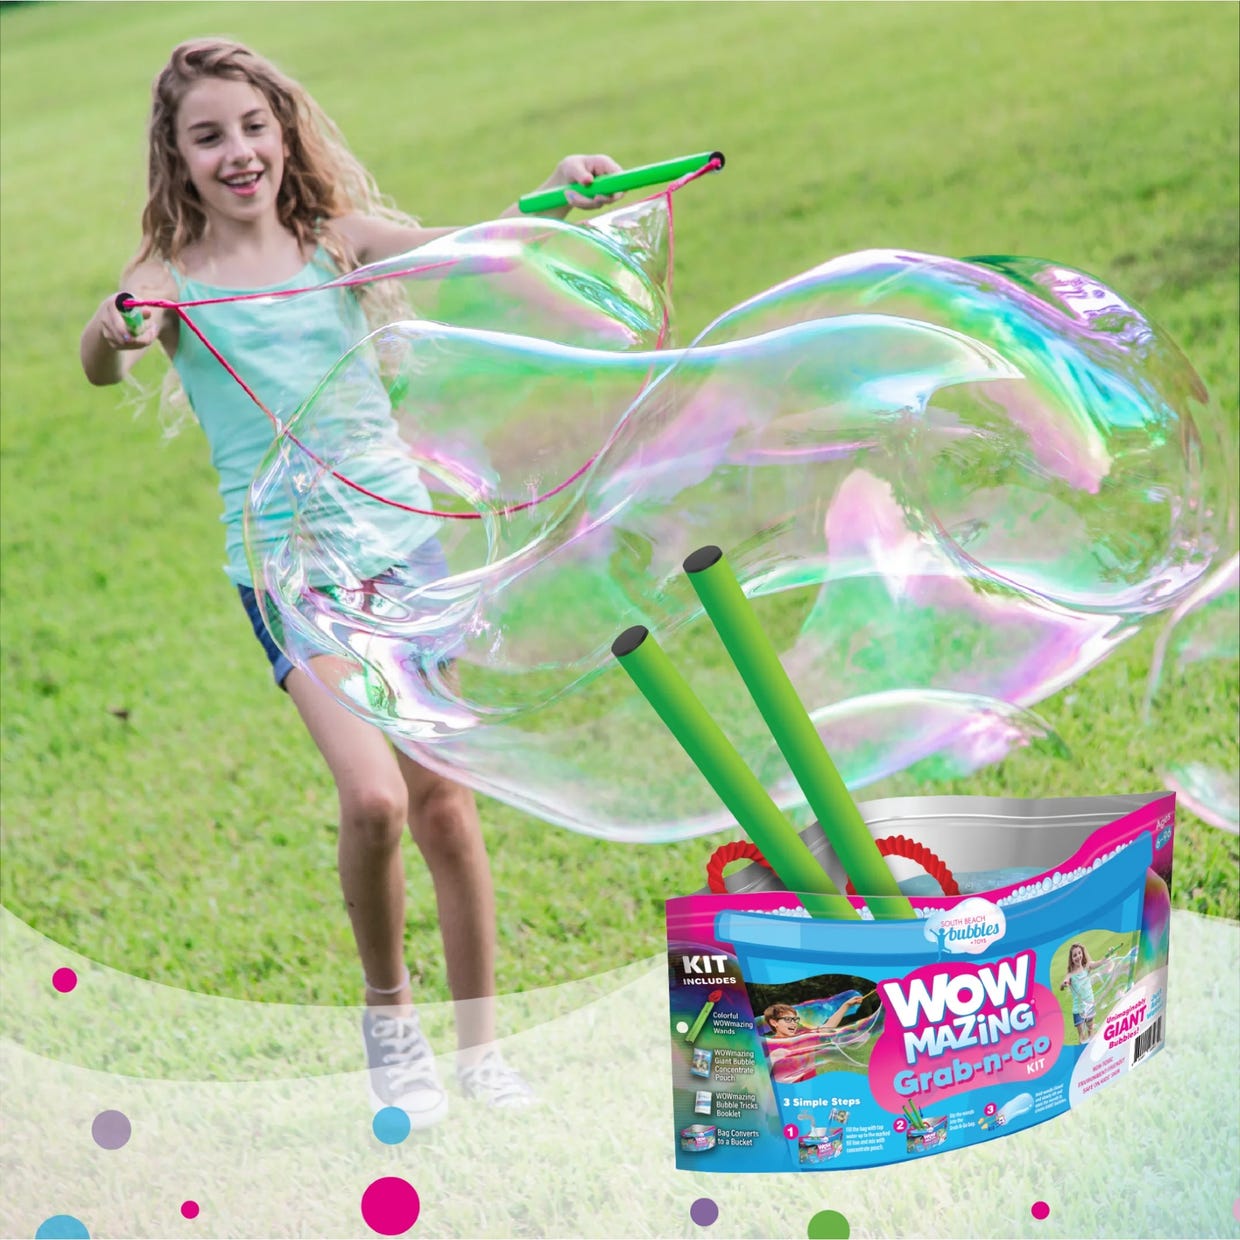 A girl playing with a giant bubble creation kit outdoors.